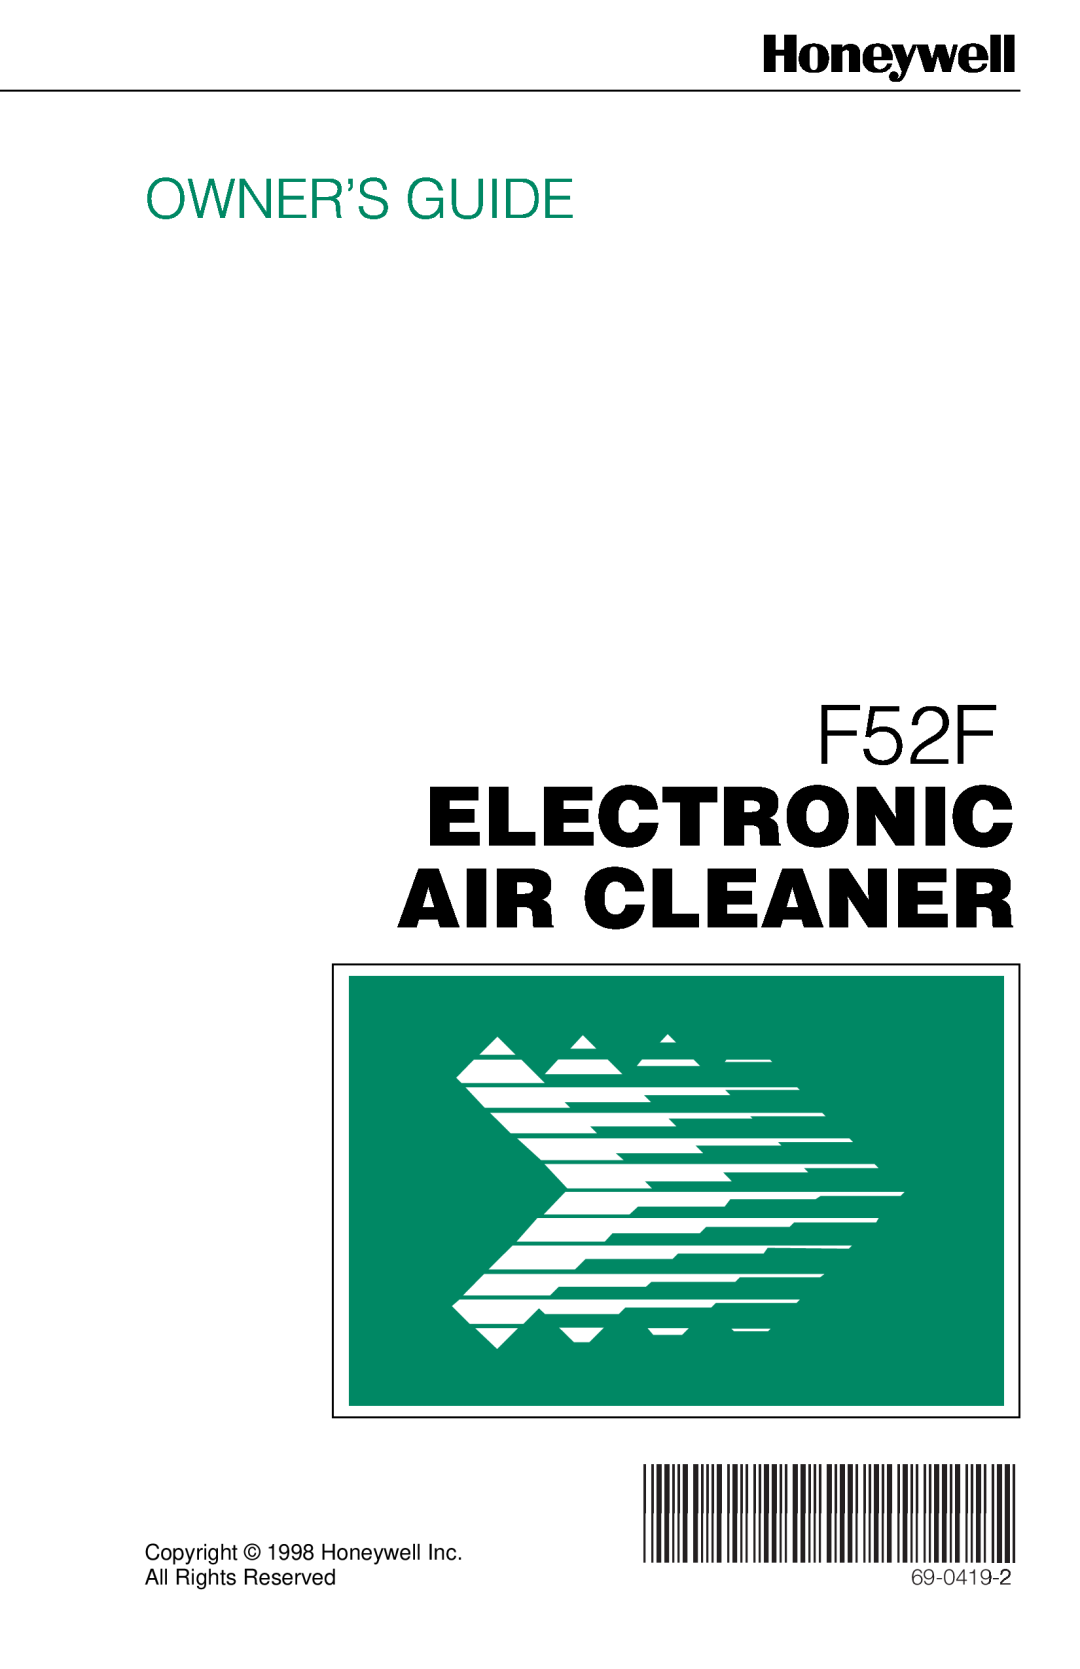 Honeywell F52F manual Electronic Air Cleaner, Owner’S Guide, Copyright 1998 Honeywell Inc, 69-0419-2, All Rights Reserved 